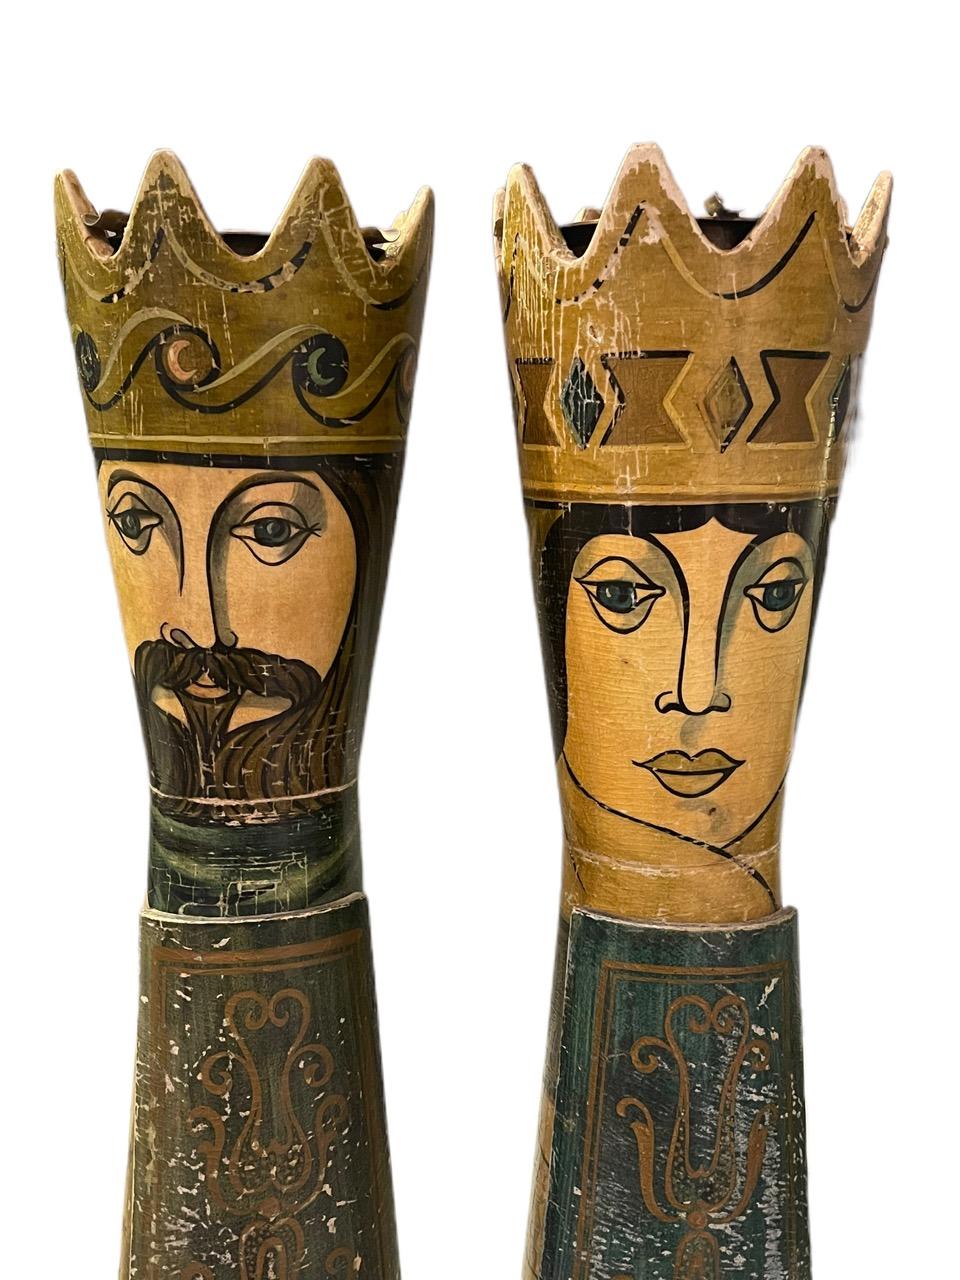 A pair of 20th century (1960s) Italian standing floor ashtrays in goatskin and metal brass details made by Aldo Tura. They are modeled as a King and a Queen. Both have small doors to store cigarettes. They can also be used as floral vases.
 